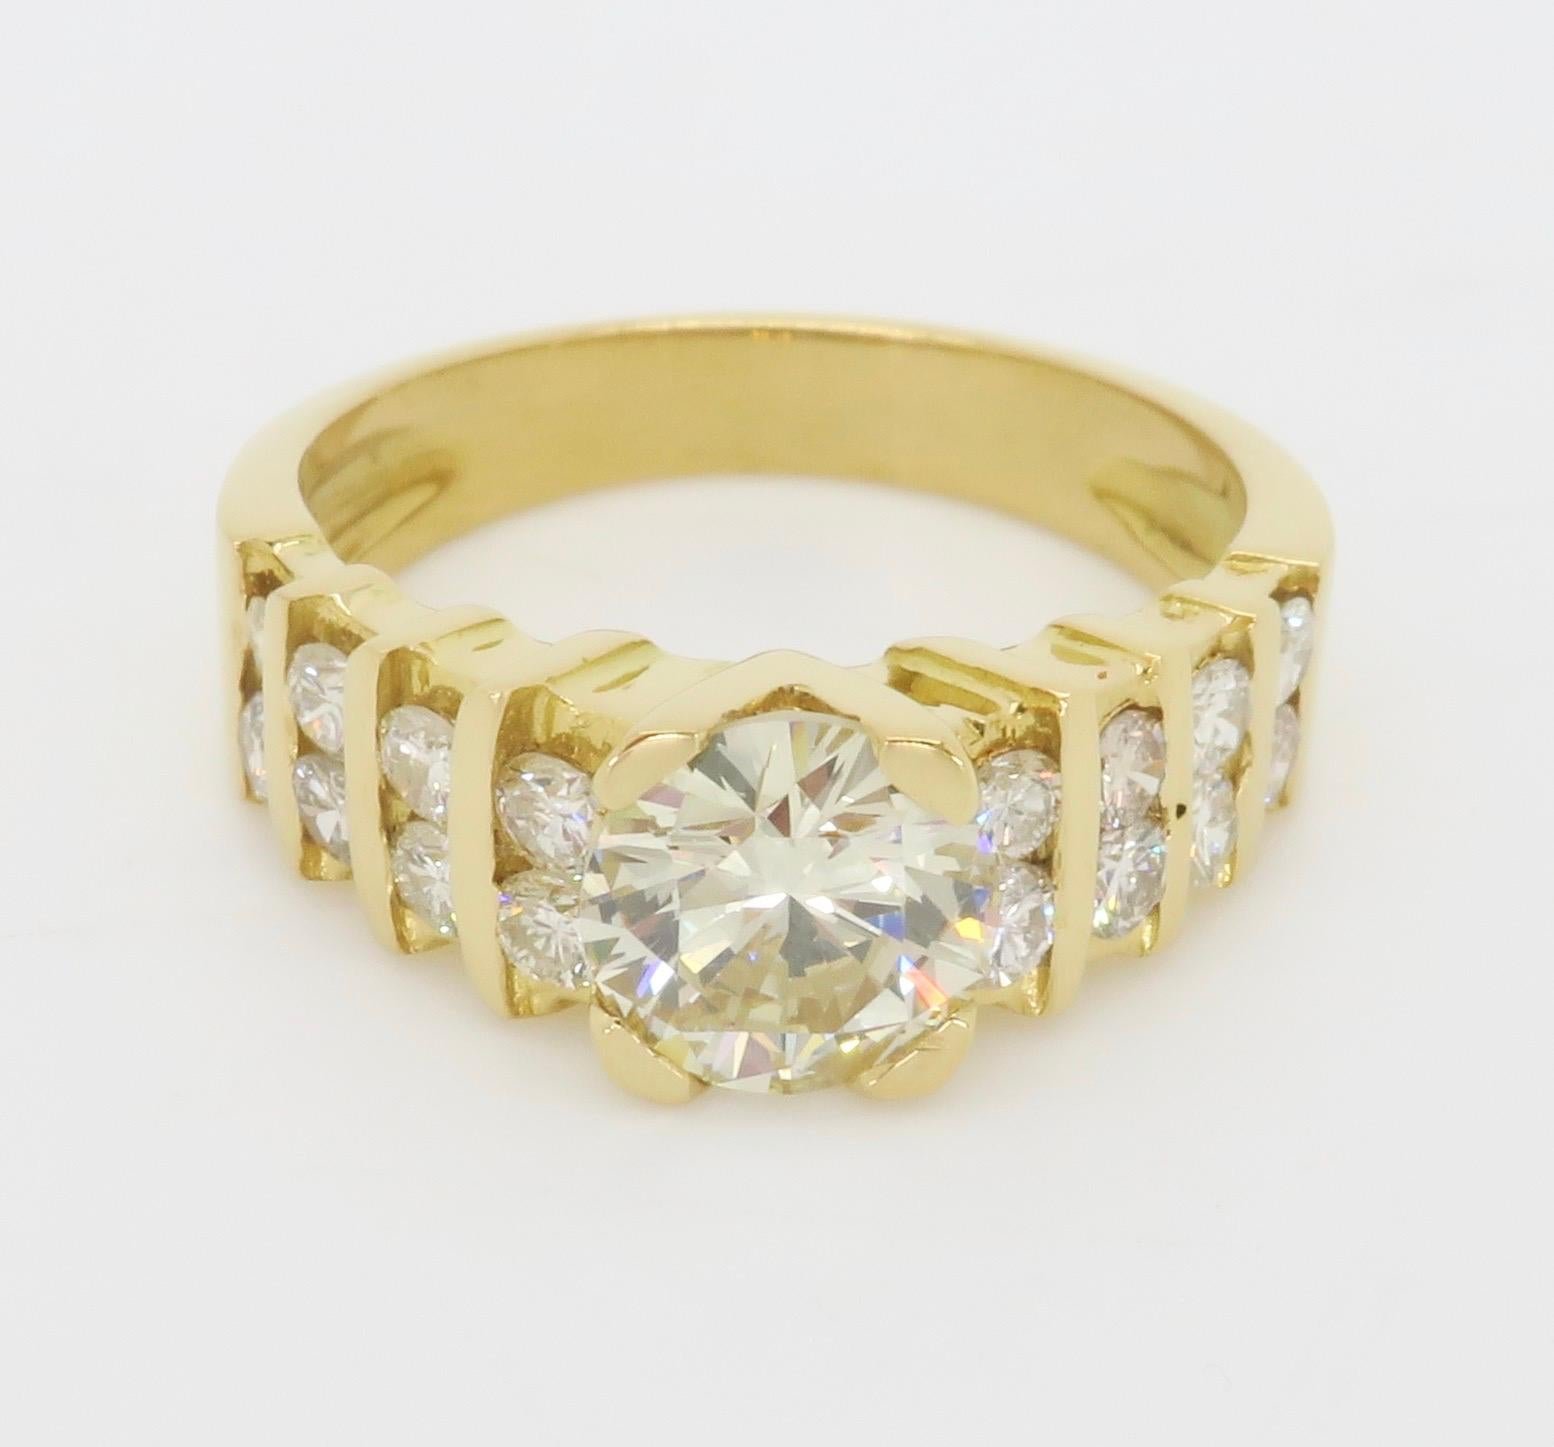 1.54ctw Diamond Encrusted Ring in 14k Yellow Gold In Excellent Condition For Sale In Webster, NY